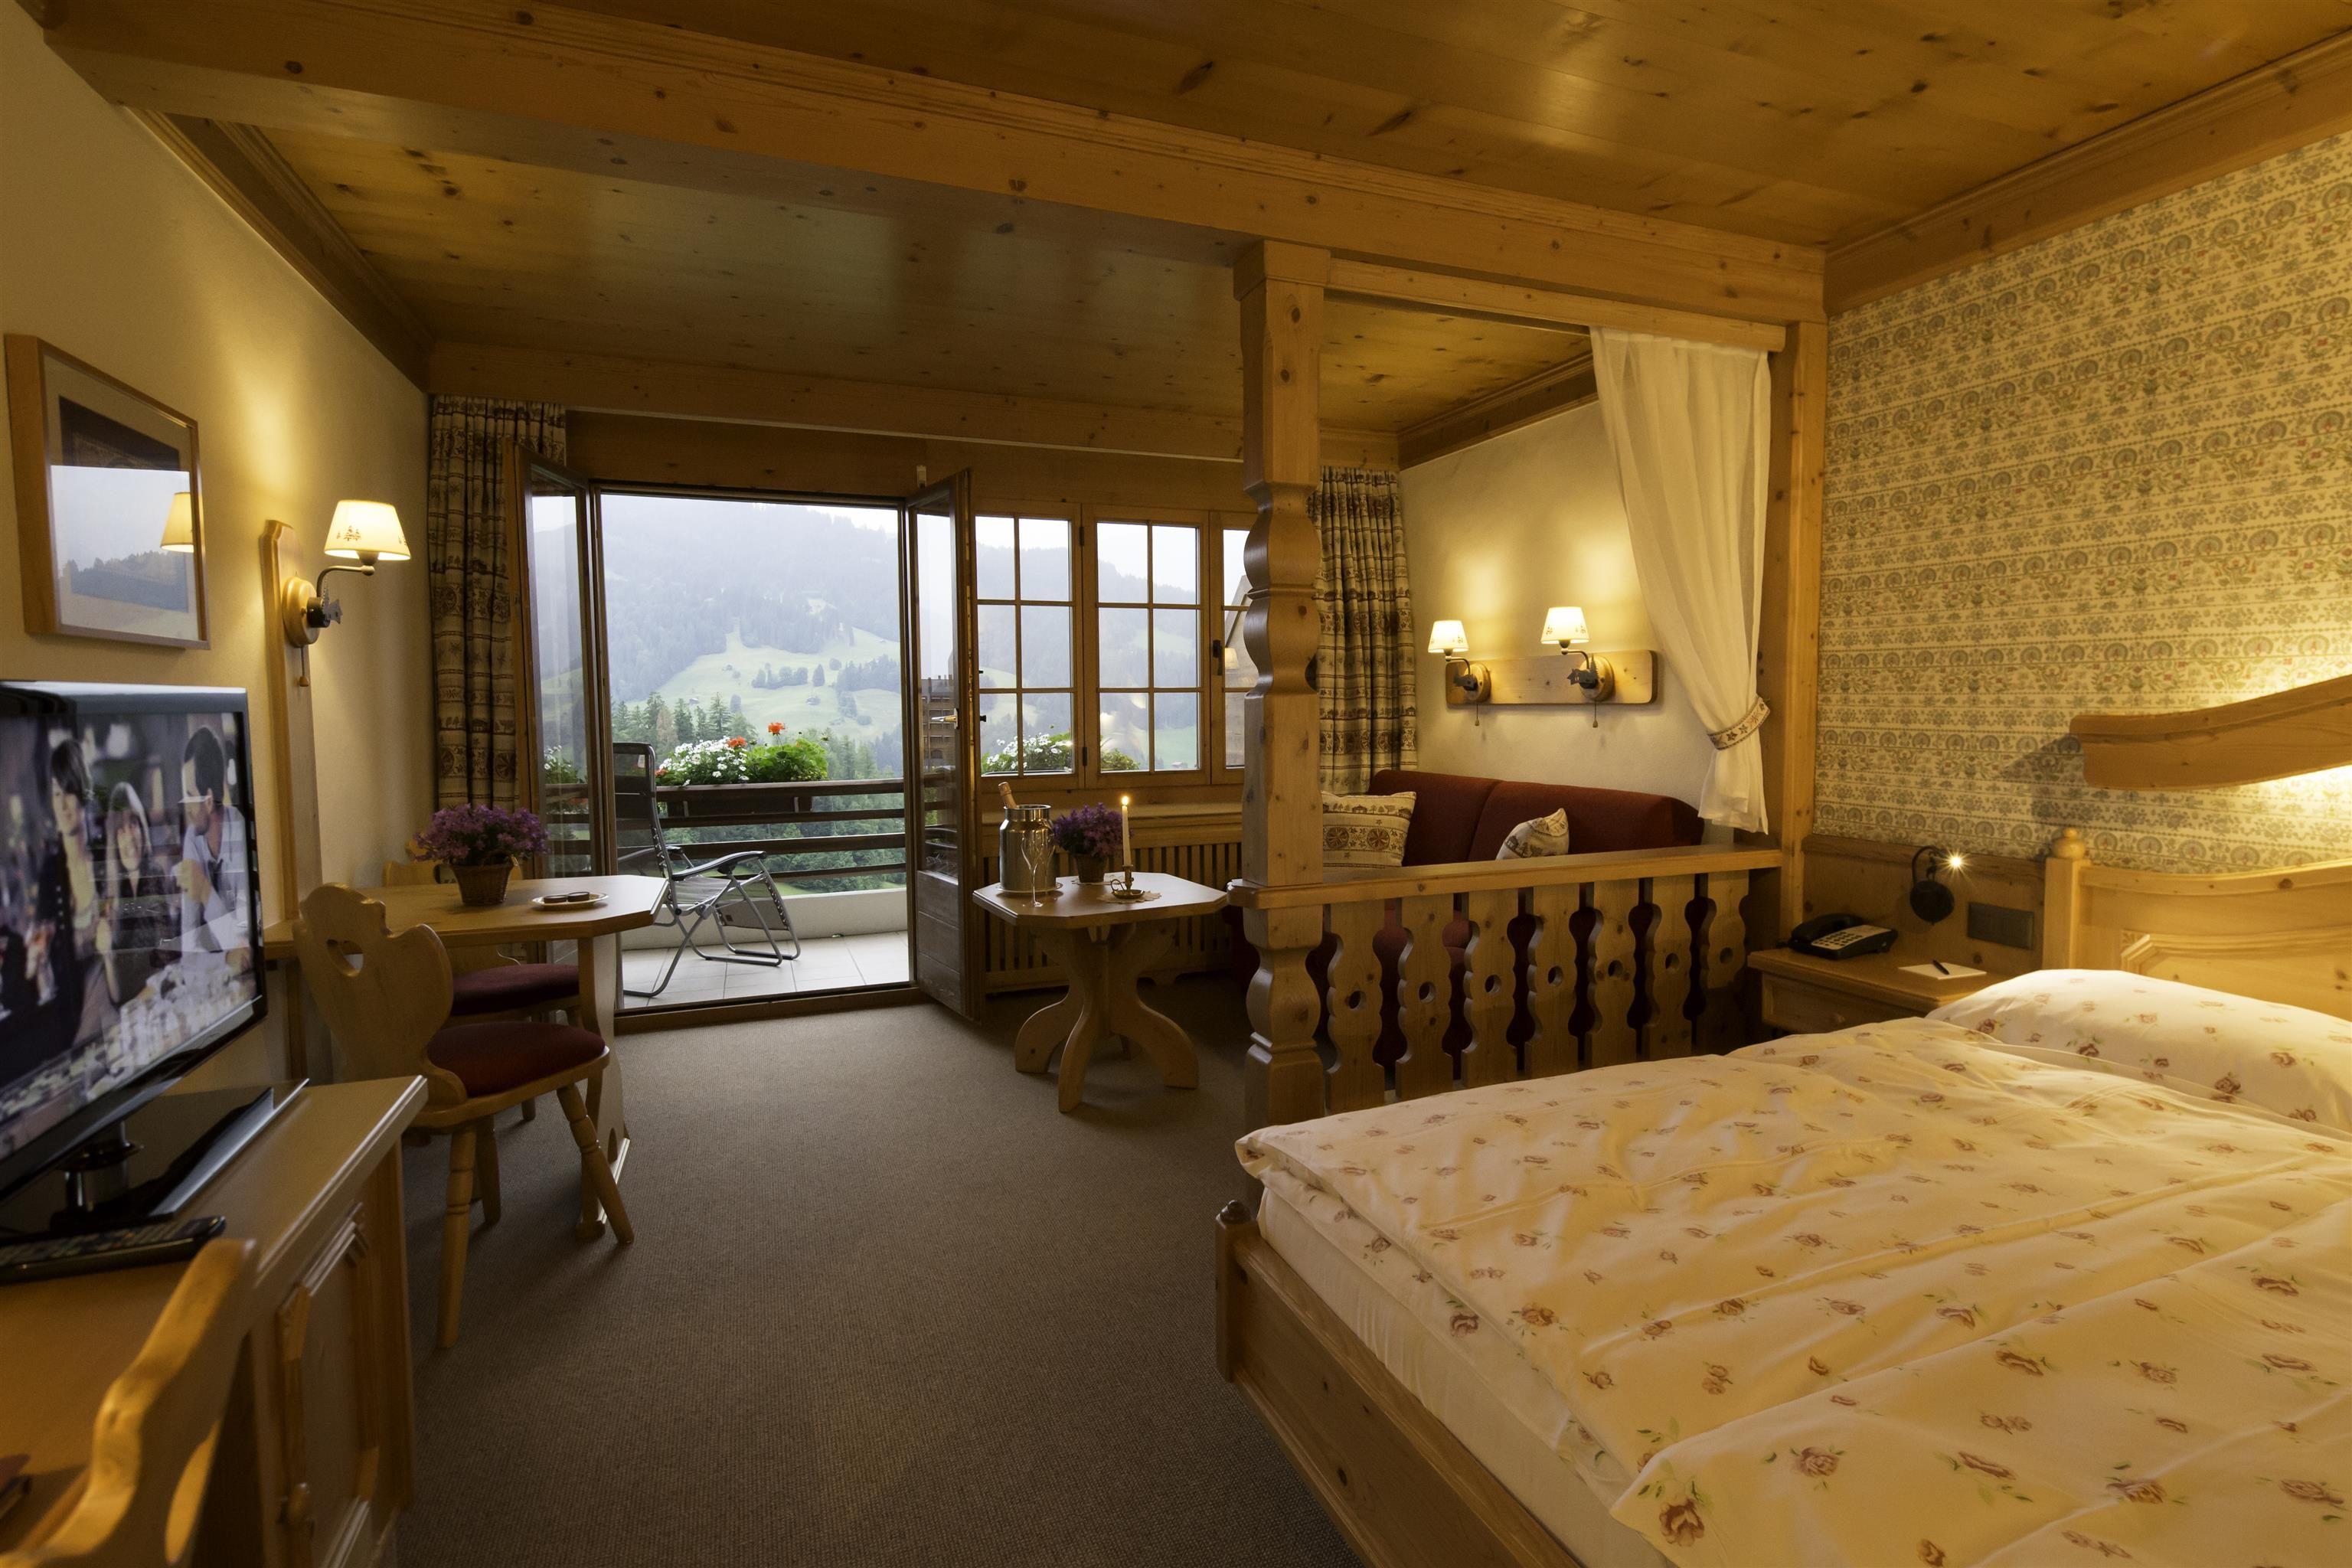 Comfortable double room, decorated in typical chalet style with a seating area and a balcony facing south, east or west side with stunning views over Gstaad or Saanen and the surrounding mountains. Bathroom with bath or shower. Single Occupancy.